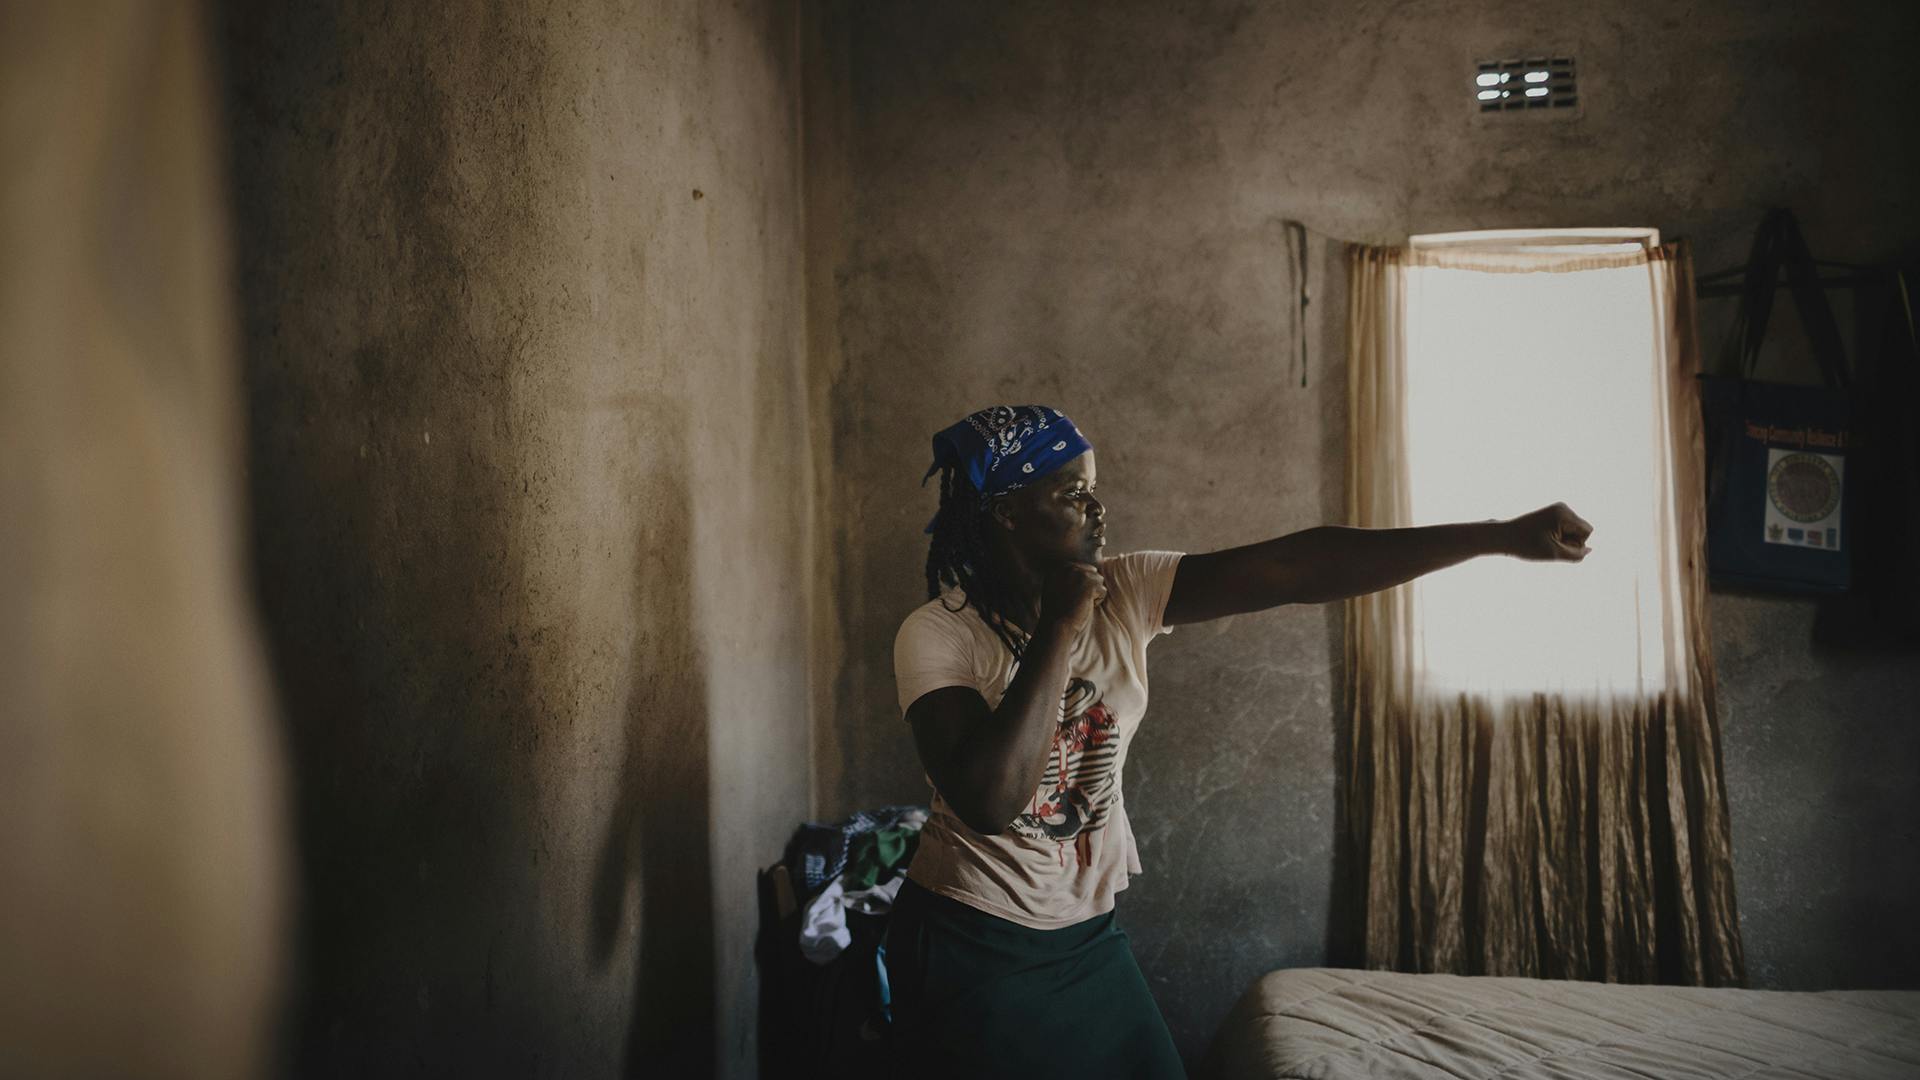 A Zimbabwean woman in a room doing a boxing pose.